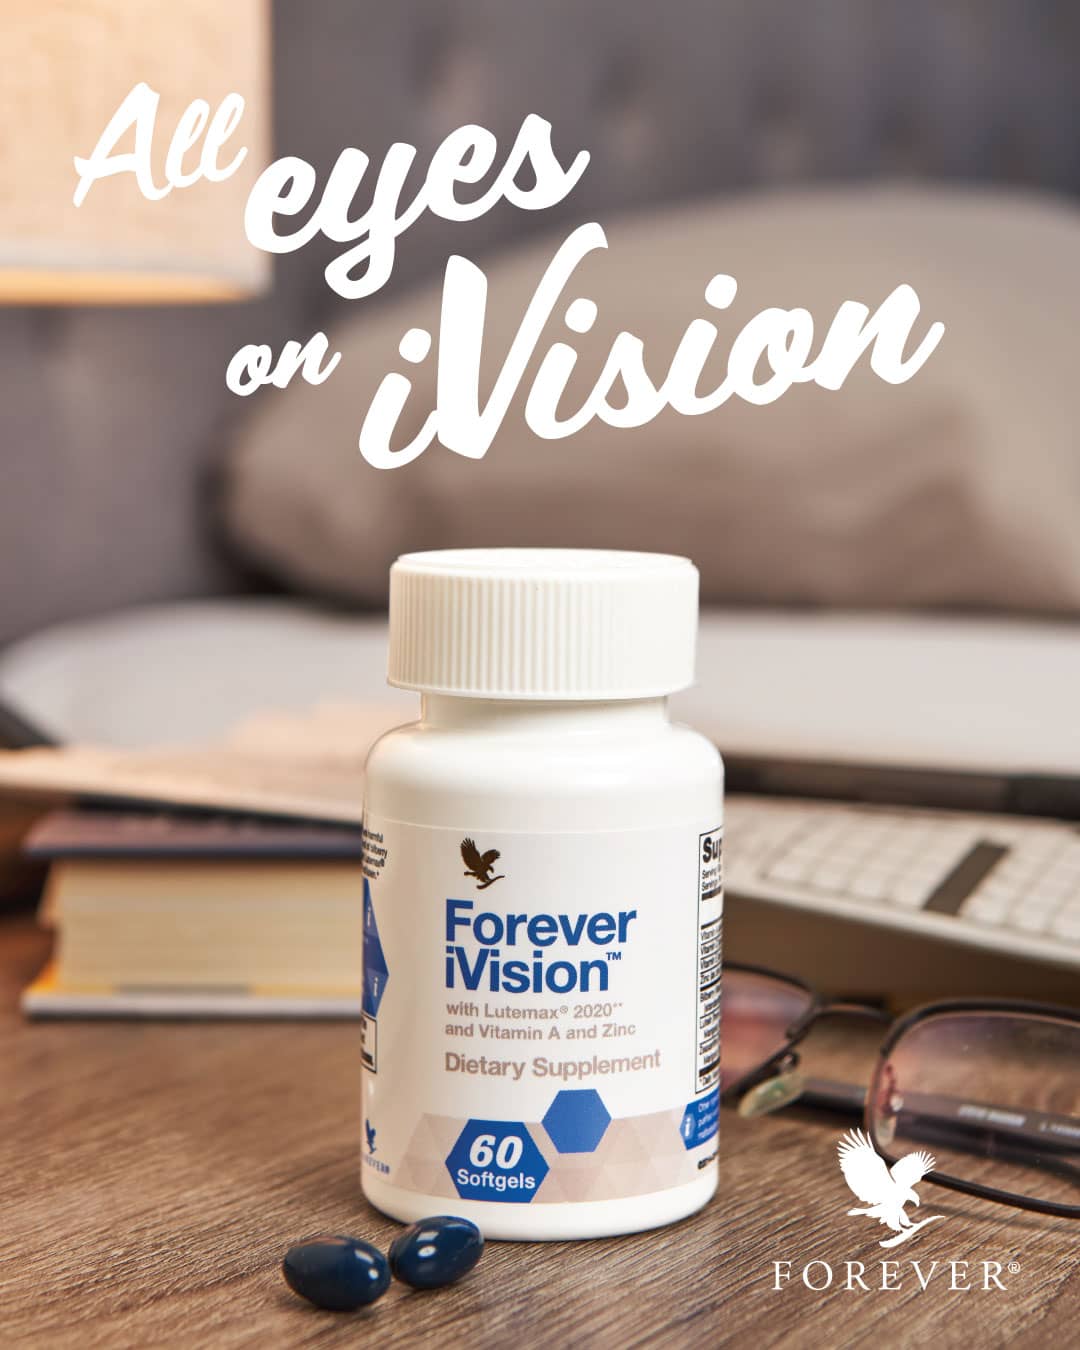 Forever Ivision Treats Glaucoma